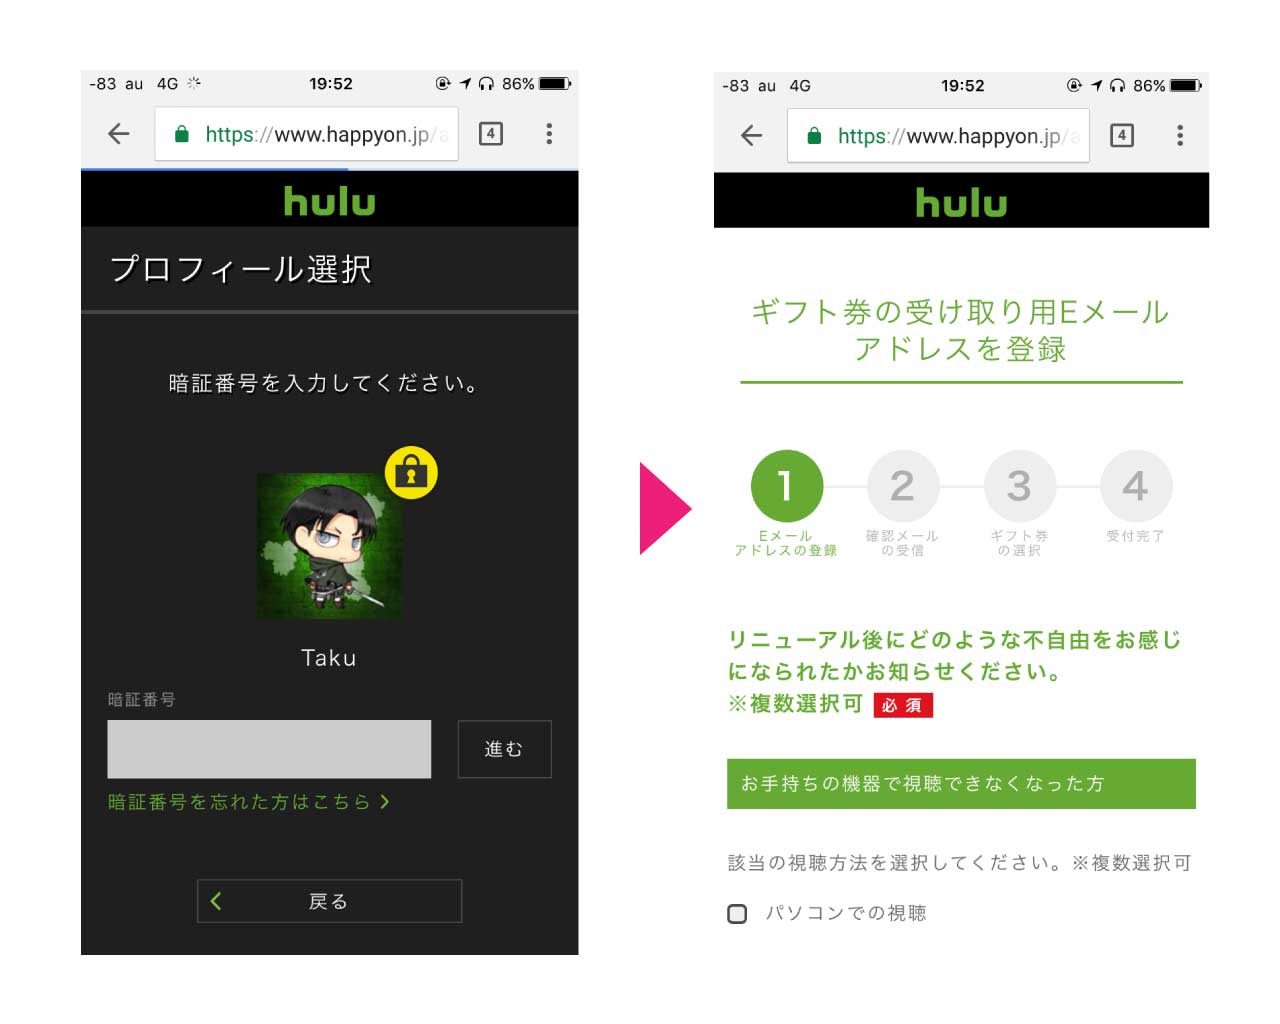 hulu-system-trouble-ticket-request-finish-3